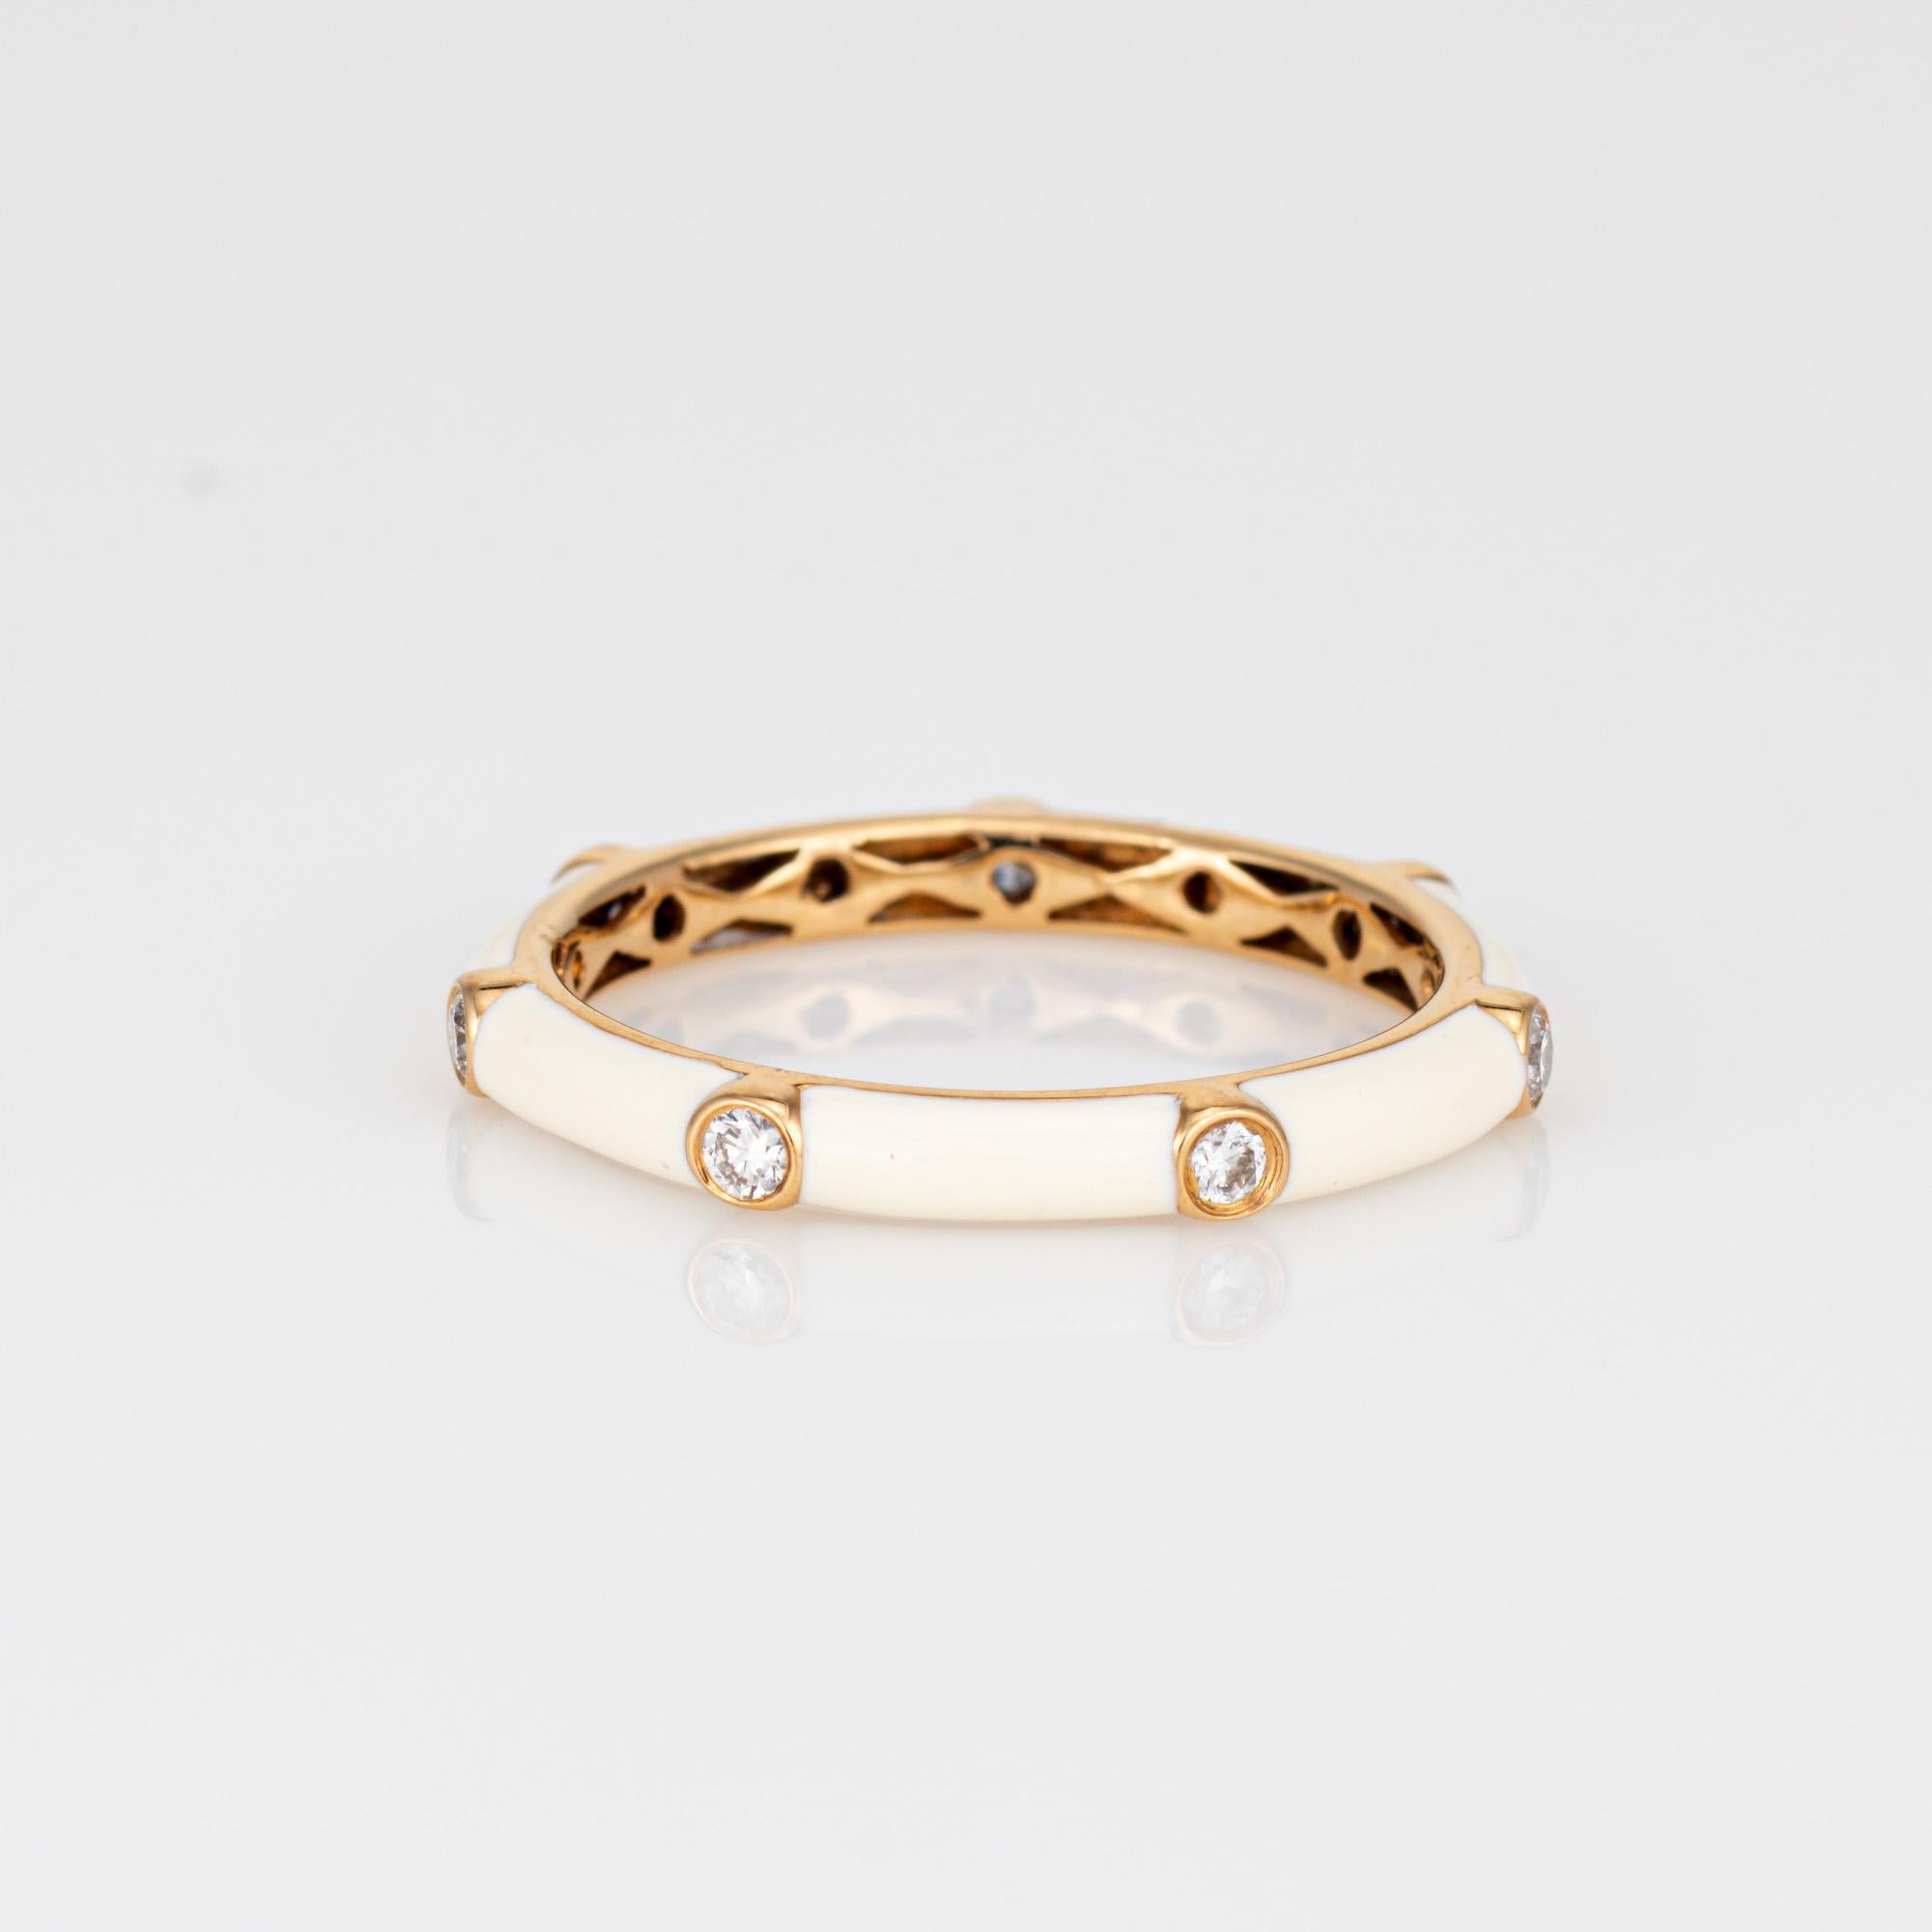 Modern White Enamel Diamond Ring 18k Yellow Gold Stacking Band Fine Jewelry For Sale